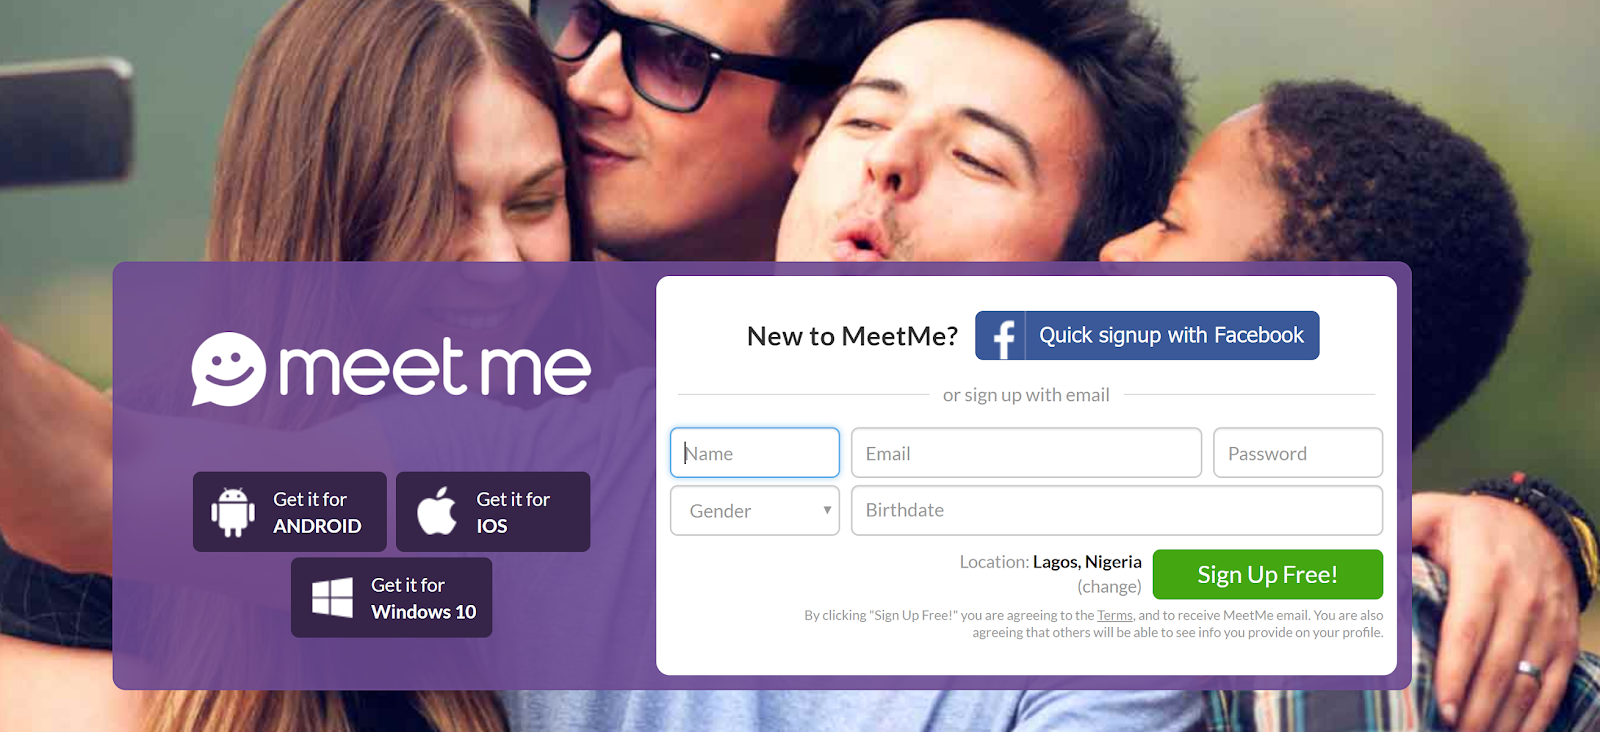 How do i change my location on meetme?